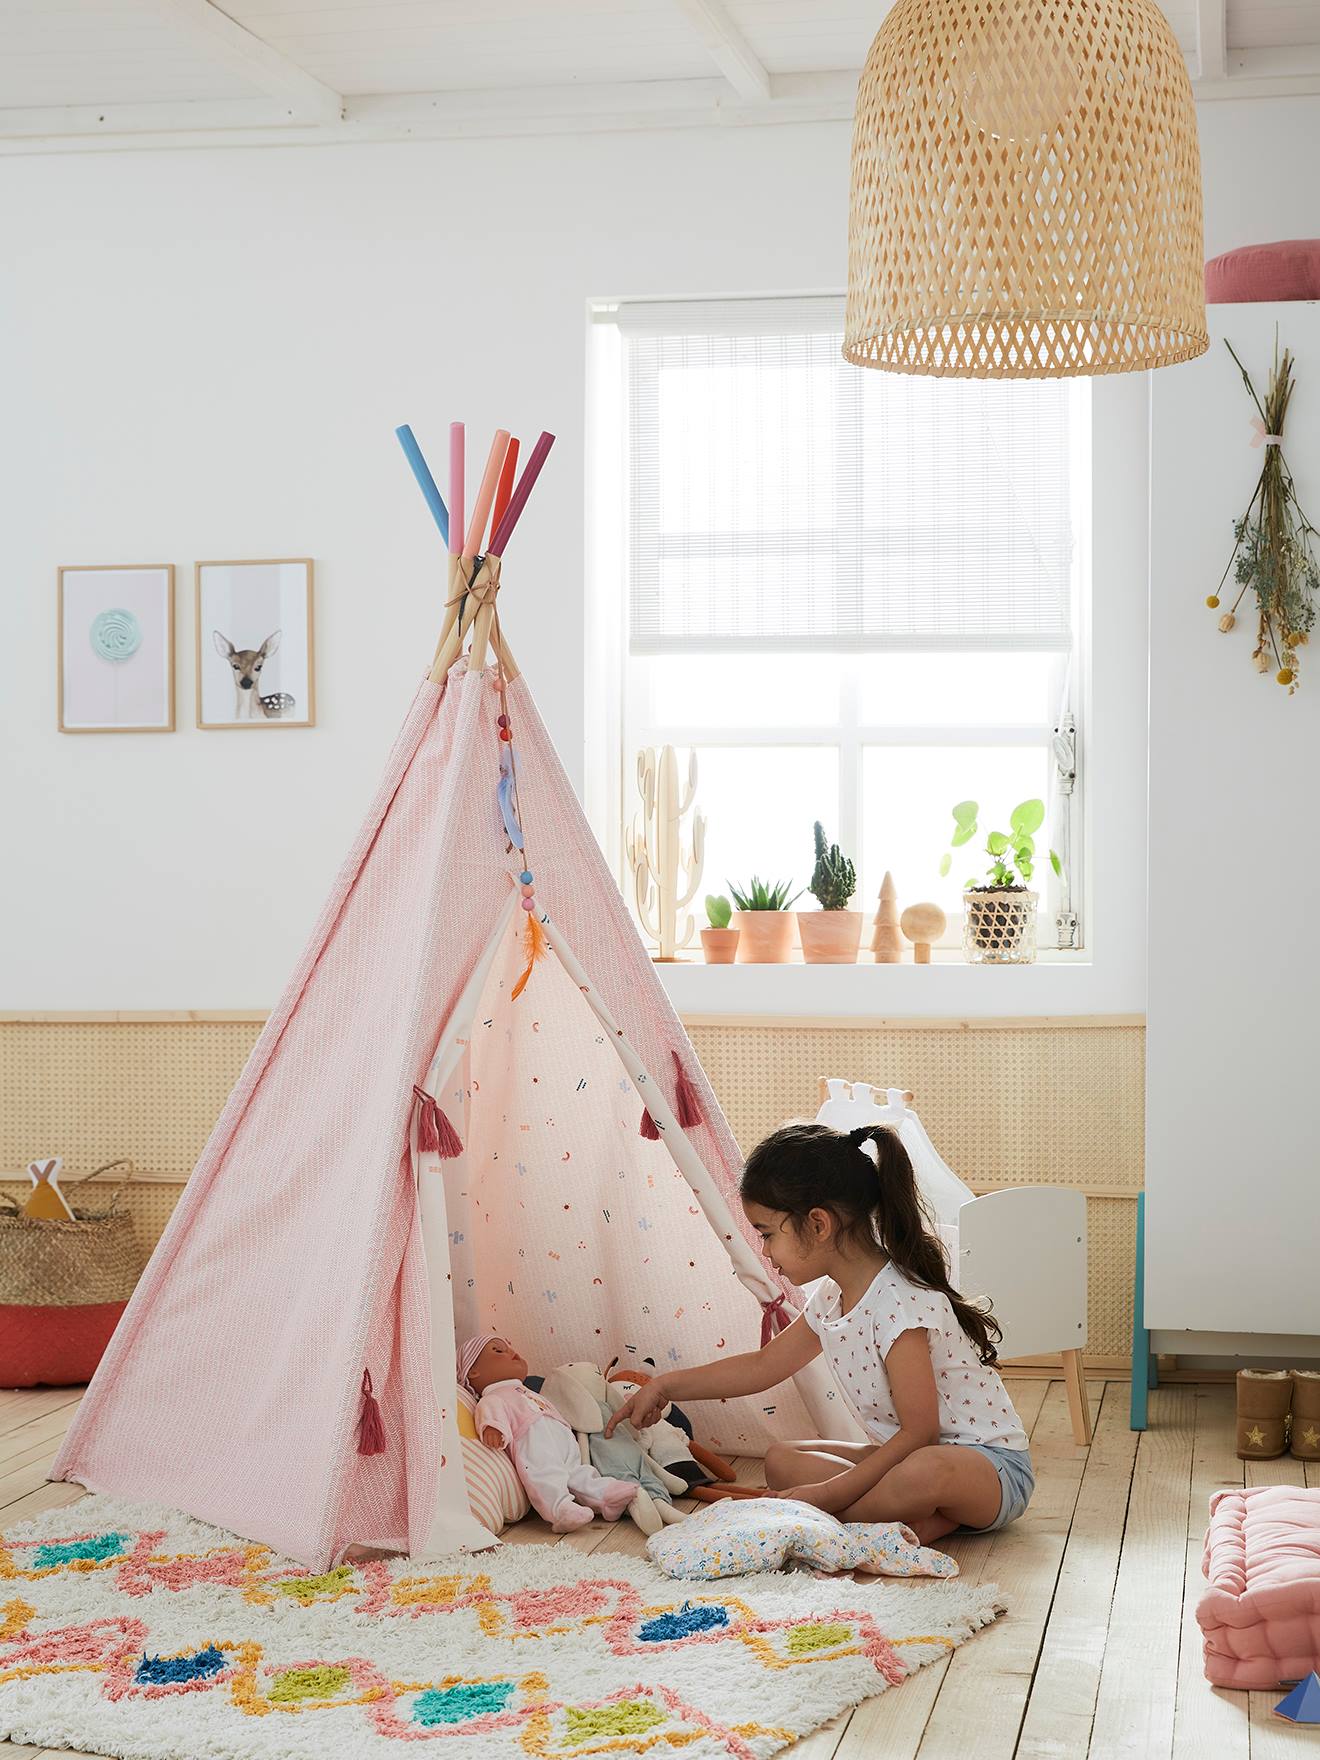 Reversible Teepee, Petite Sioux - Wood FSC(r) Certified light pink